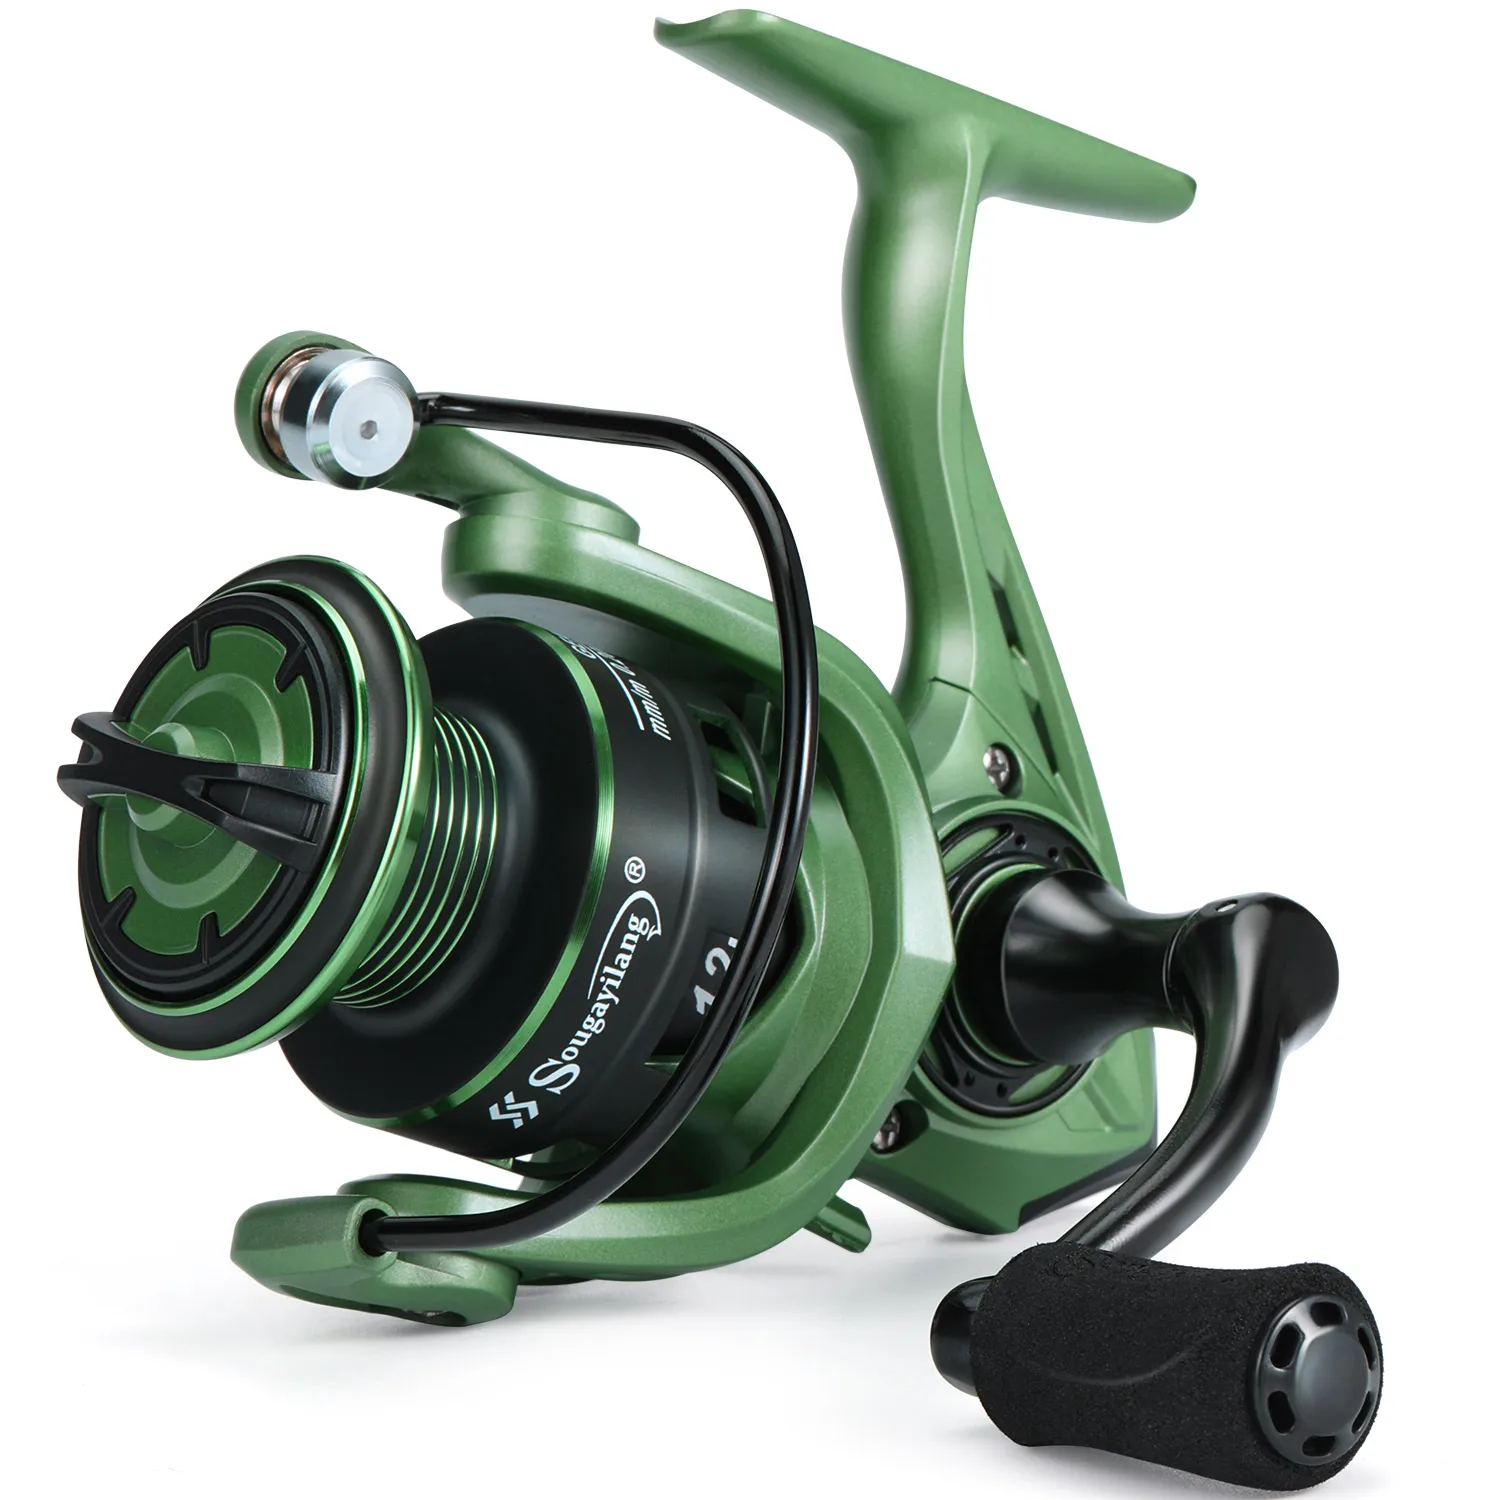 Sougayilang 2000 Sizes Fishing Reel 5.2:1 Gear Ratio Max Drag 5kg Spinning  Reel with Aluminum Spool for Carp Freshwater Pesca